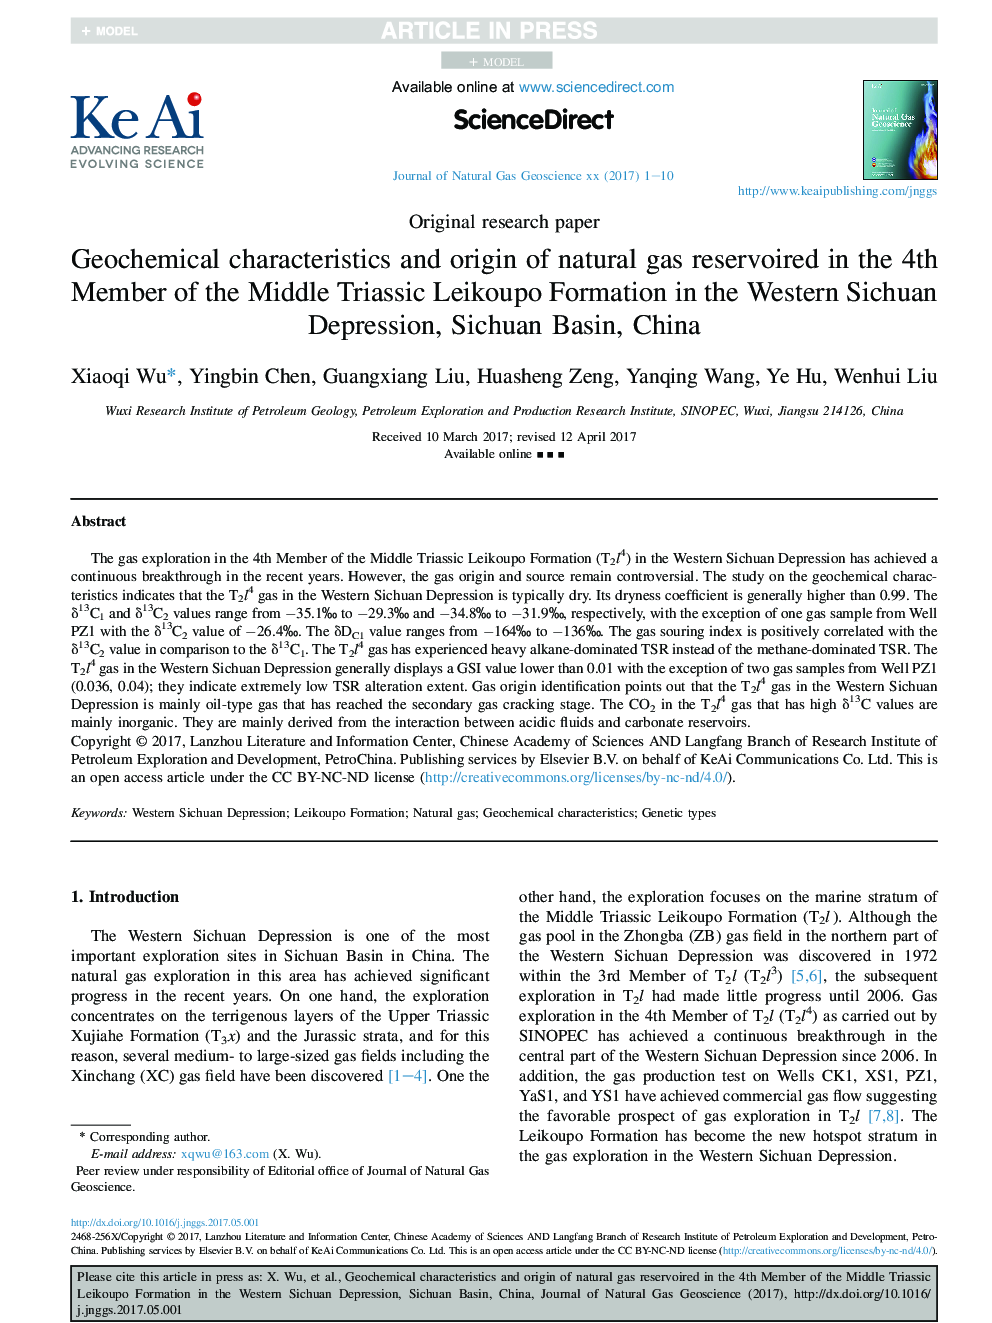 Geochemical characteristics and origin of natural gas reservoired in the 4th Member of the Middle Triassic Leikoupo Formation in the Western Sichuan Depression, Sichuan Basin, China